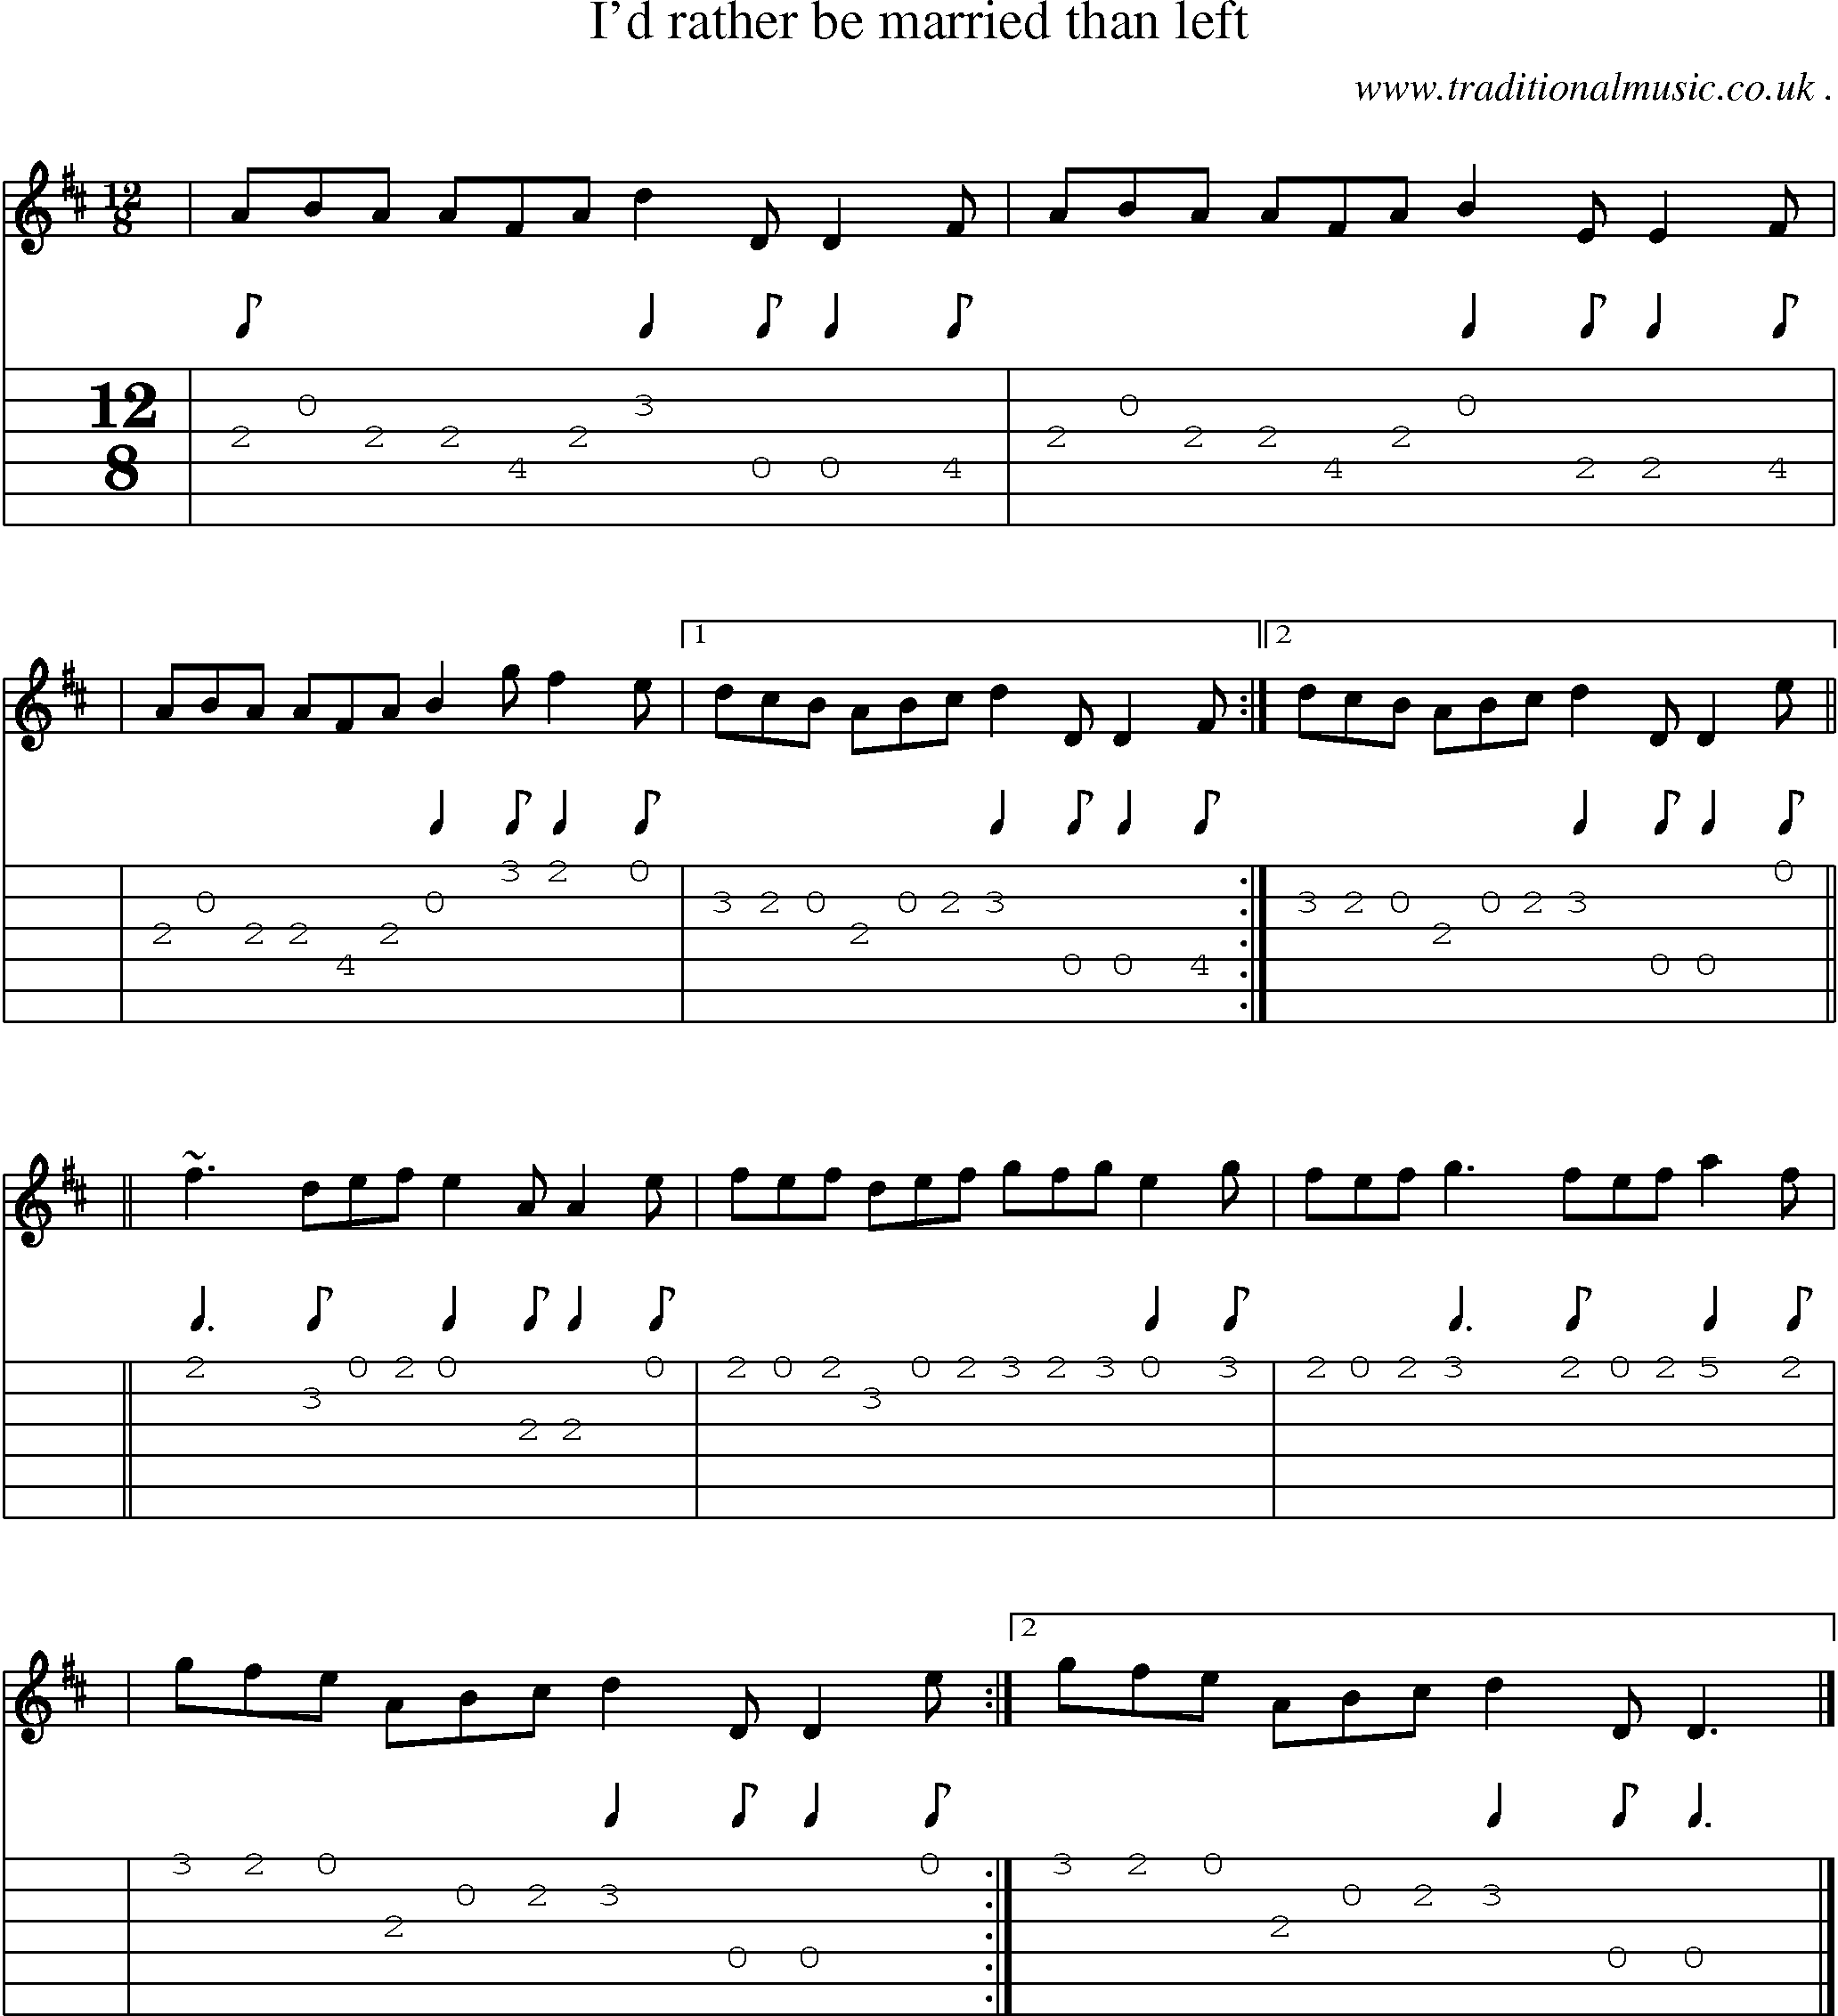 Sheet-music  score, Chords and Guitar Tabs for Id Rather Be Married Than Left